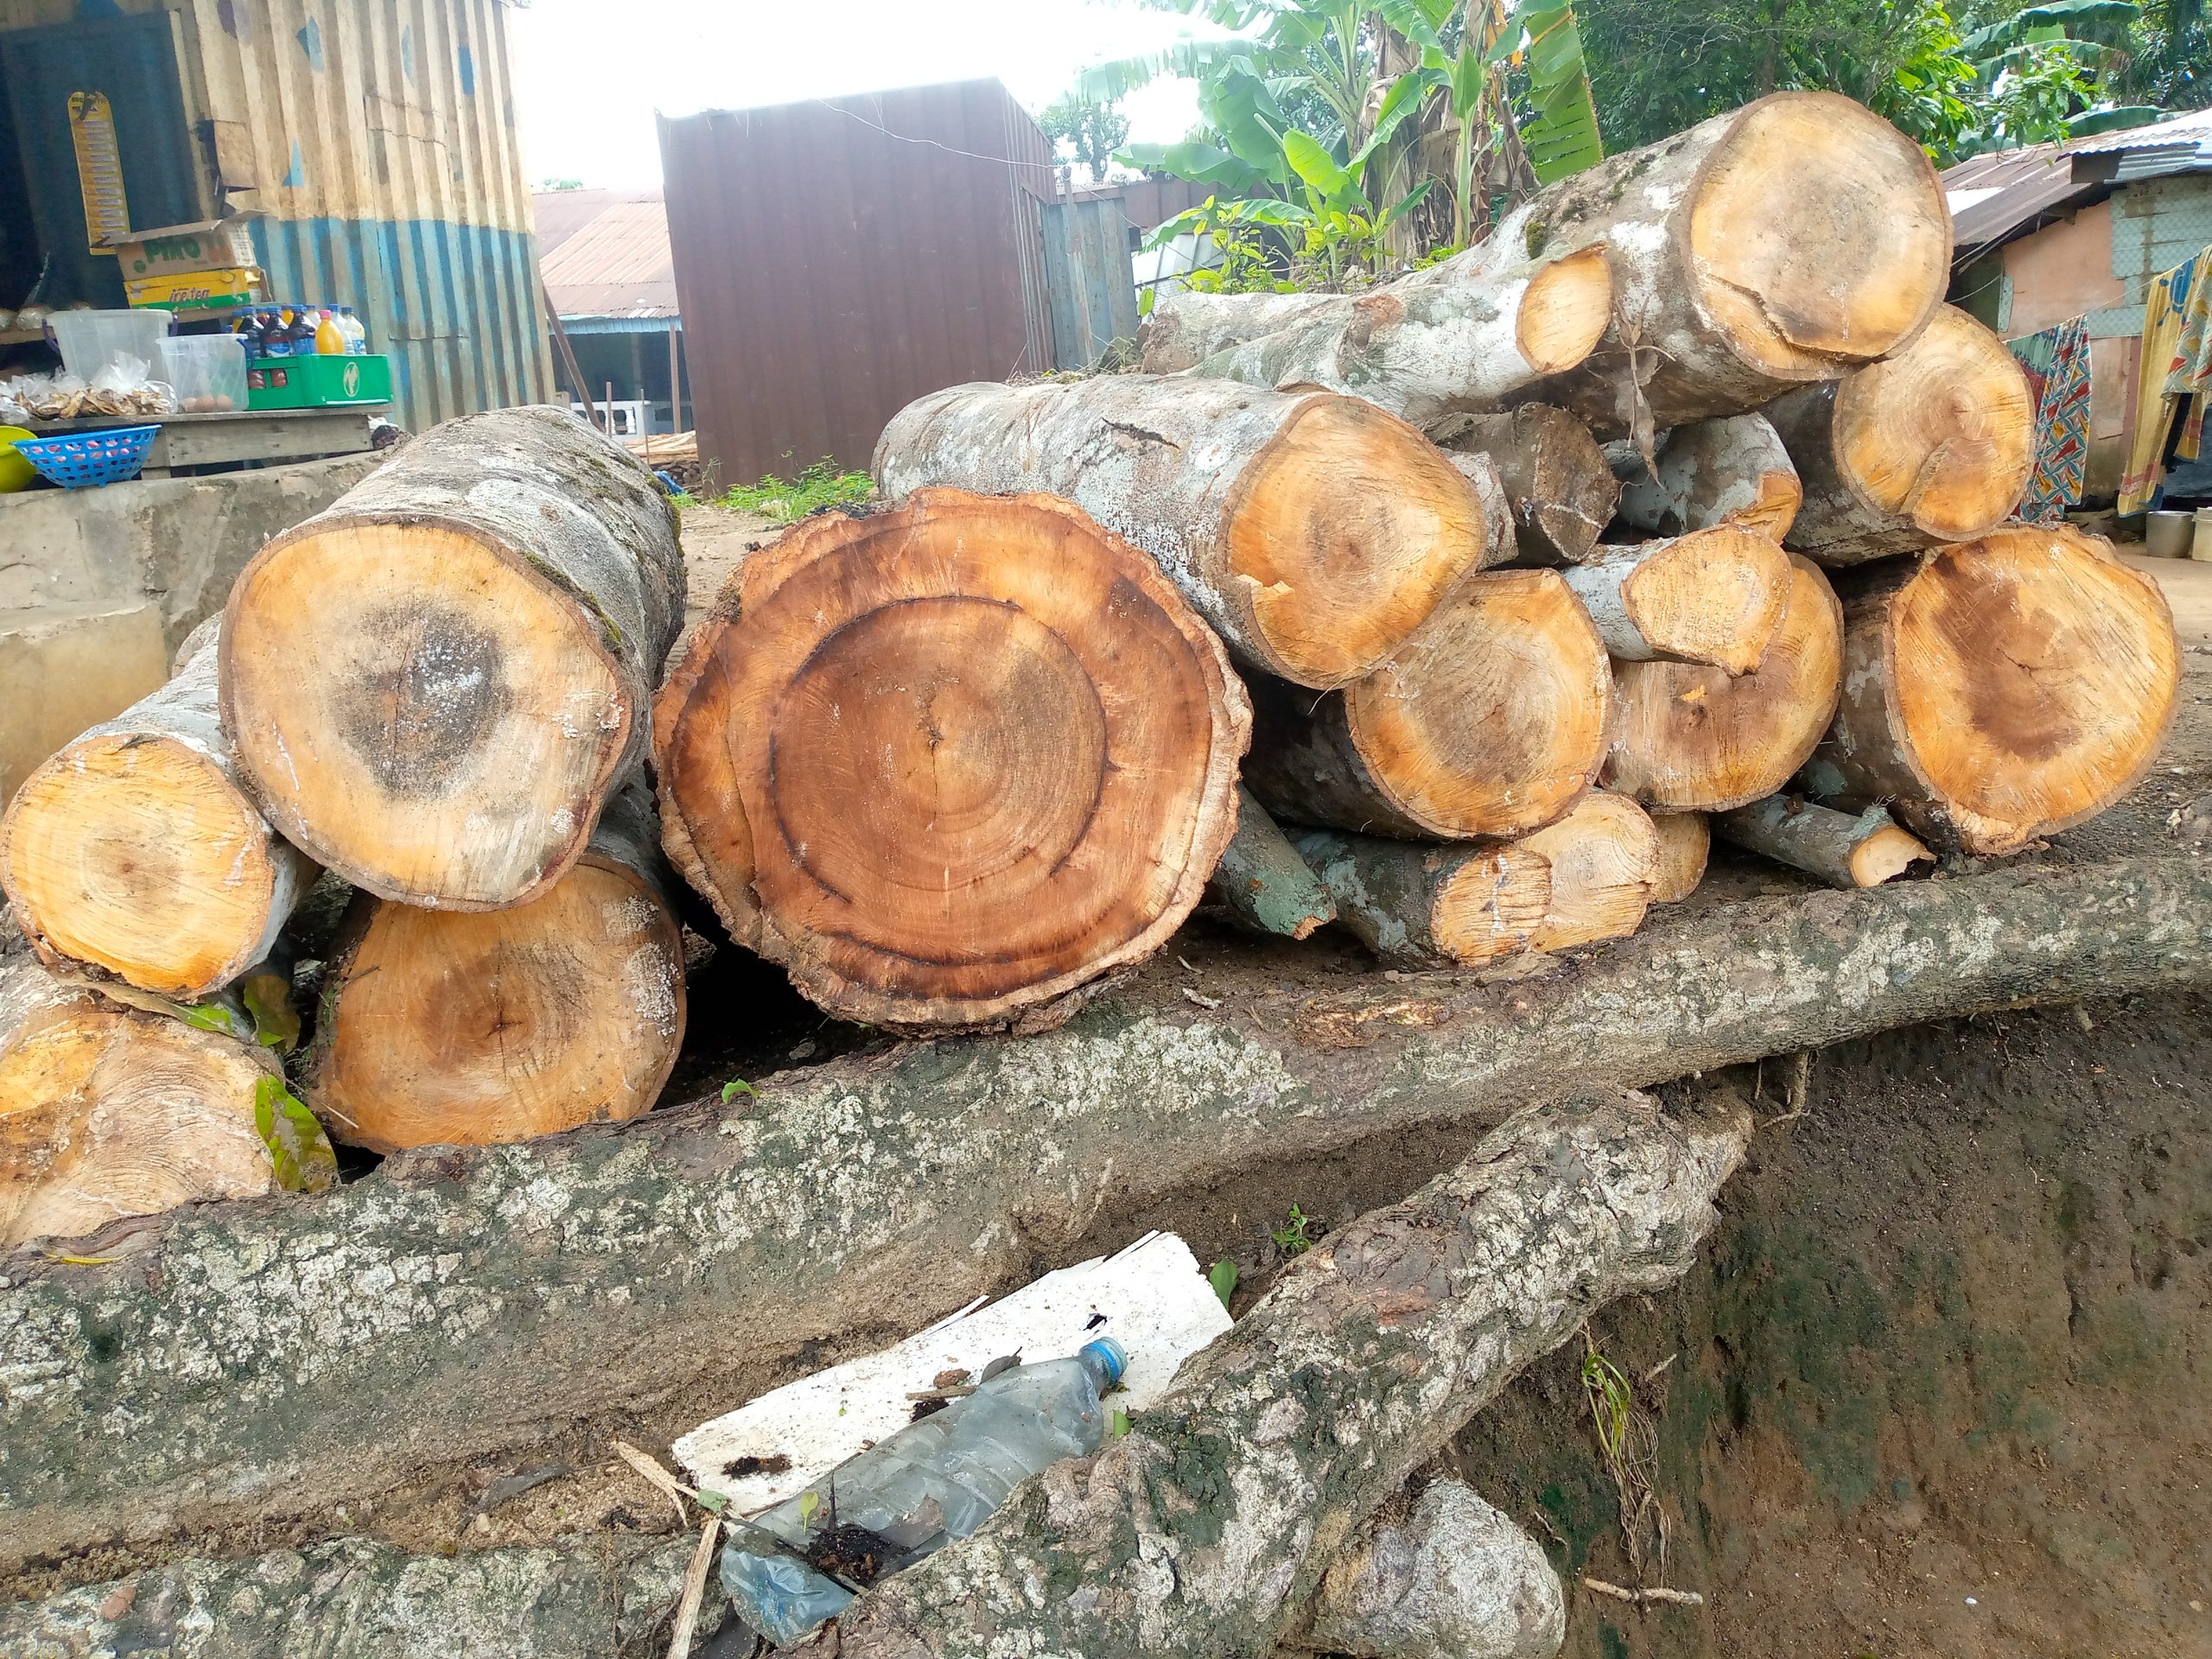 Caption: Woods extracted from the forest for fuel wood. Photo Credit: Kehinde Ogunyale